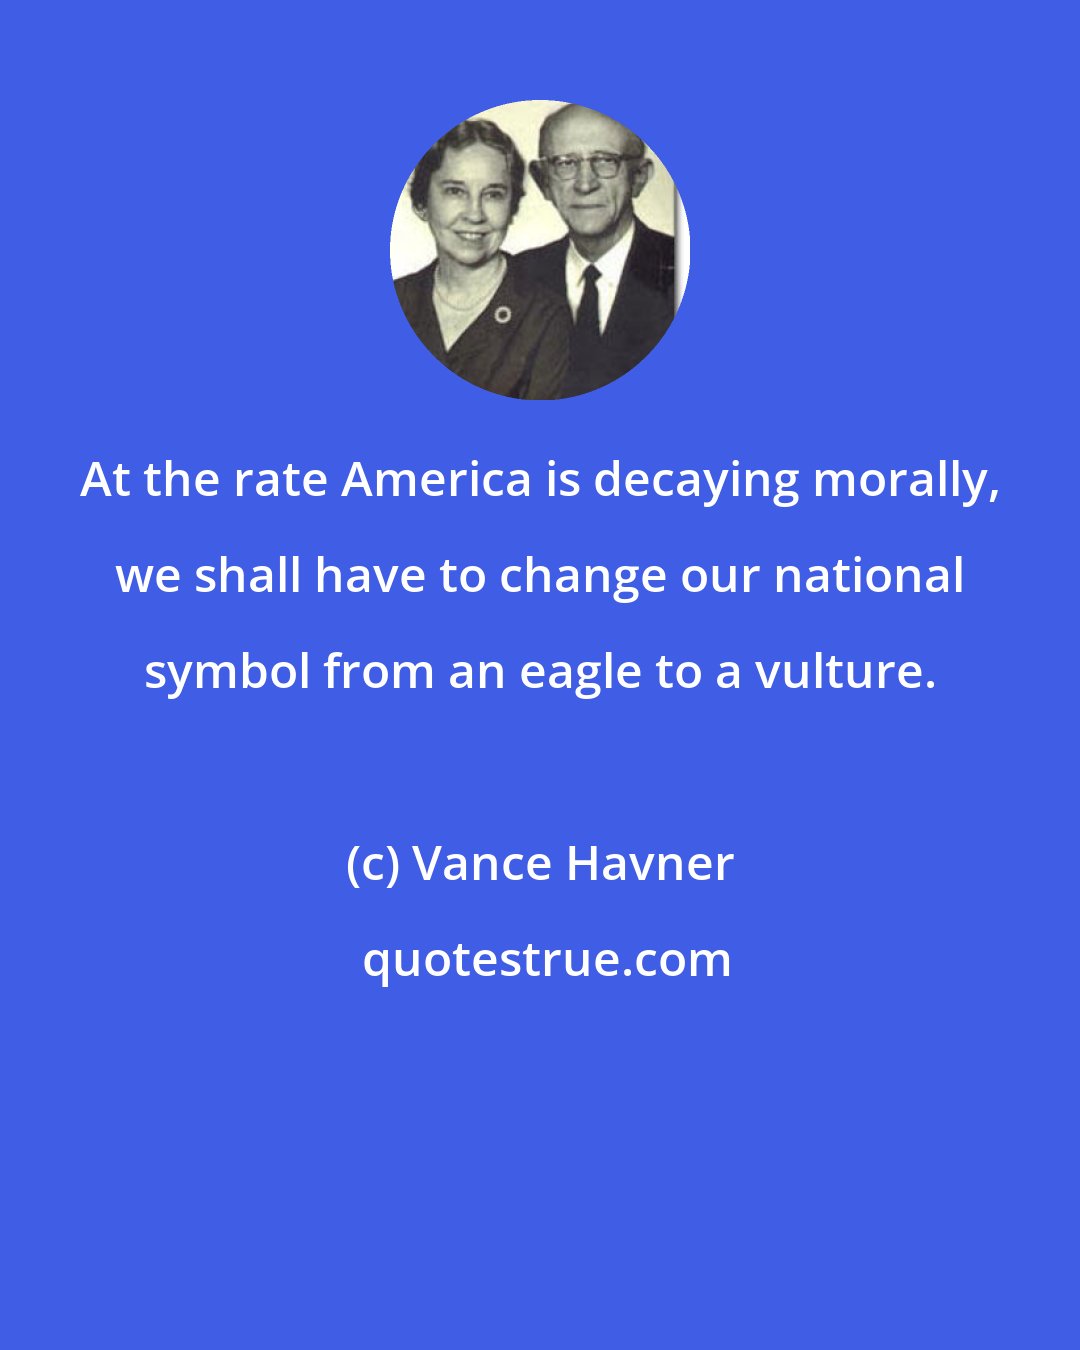 Vance Havner: At the rate America is decaying morally, we shall have to change our national symbol from an eagle to a vulture.